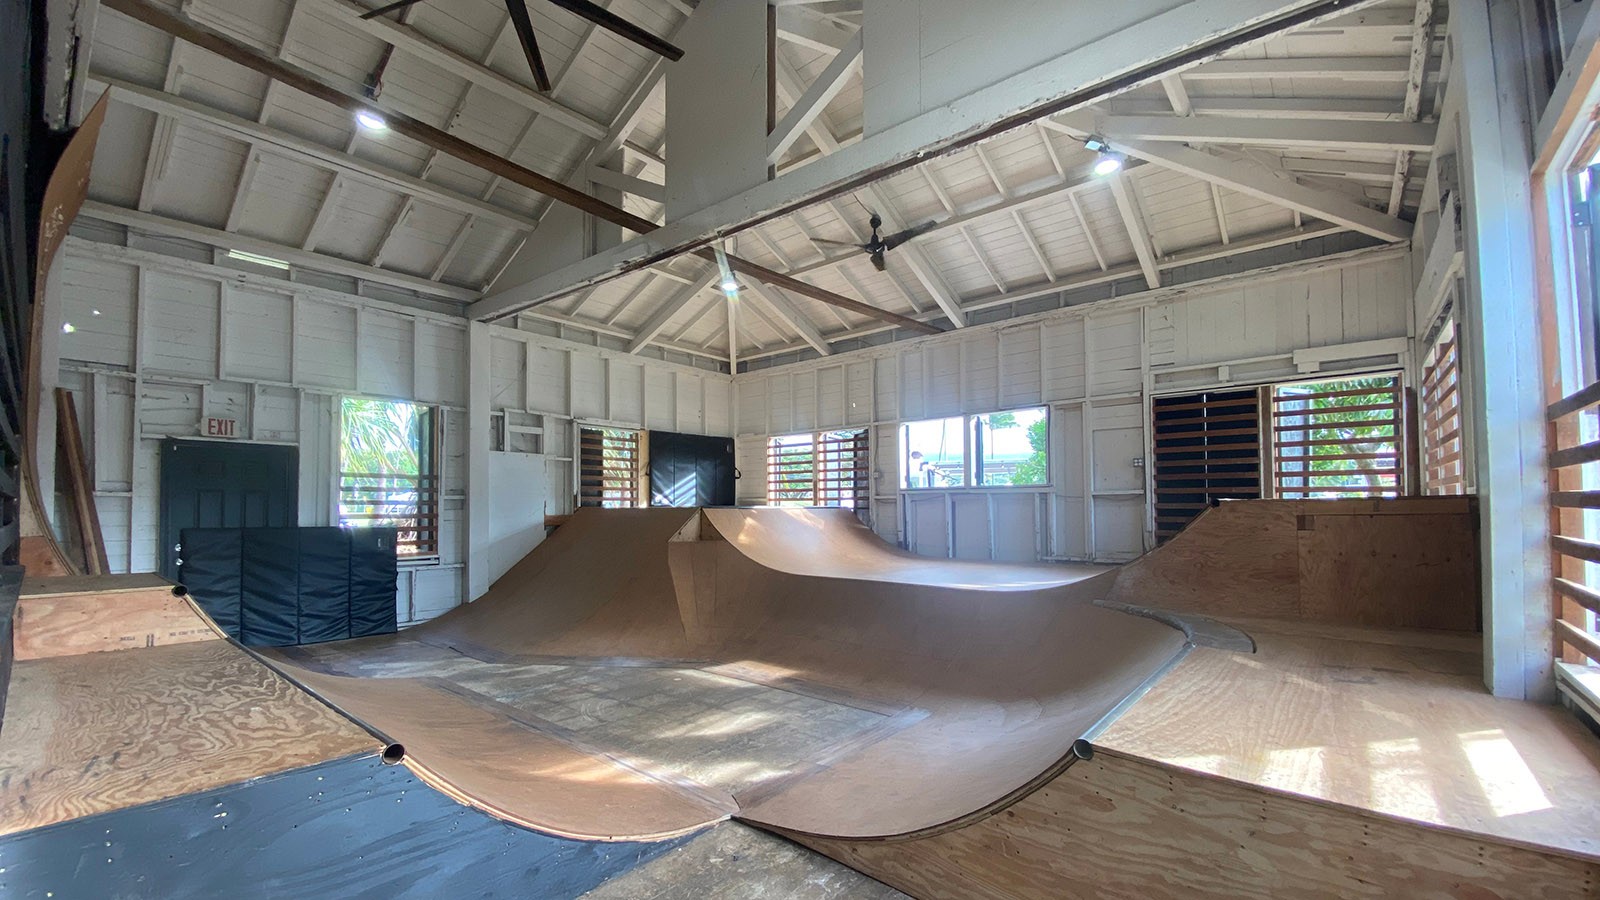 Indoor ramps and quarter pipes